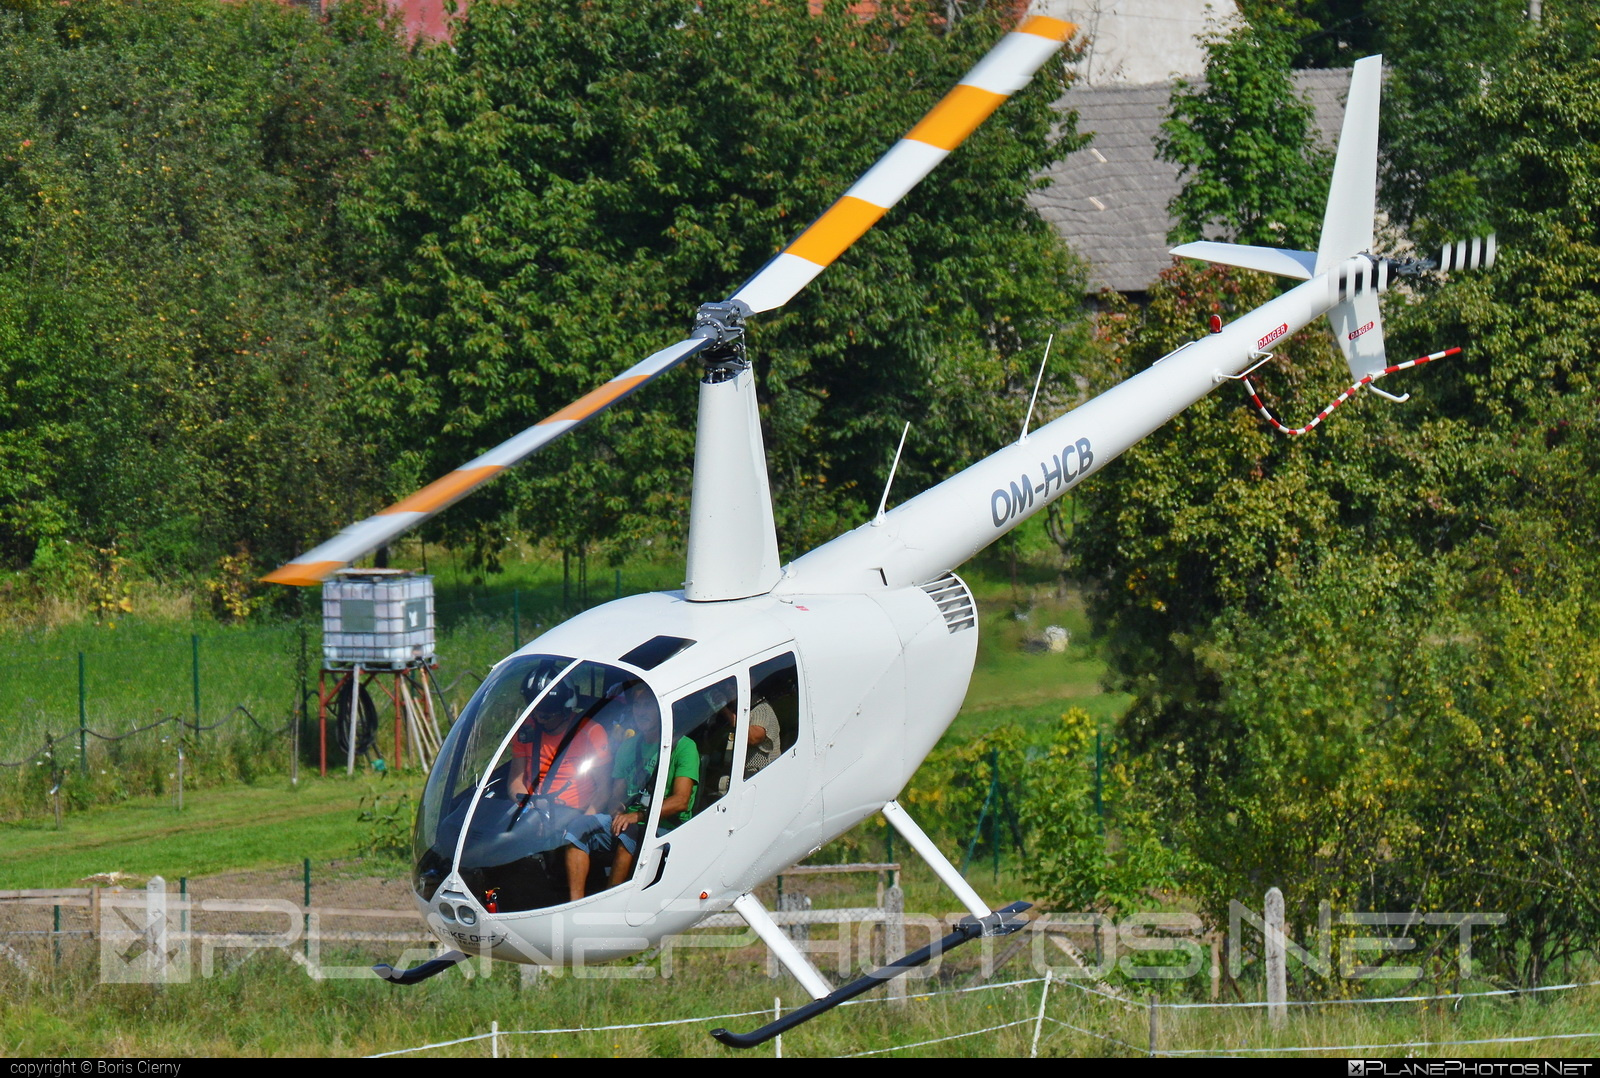 Robinson R44 Raven - OM-HCB operated by TECH-MONT Helicopter company #r44 #r44raven #robinson #robinson44 #robinson44raven #robinsonr44 #robinsonr44raven